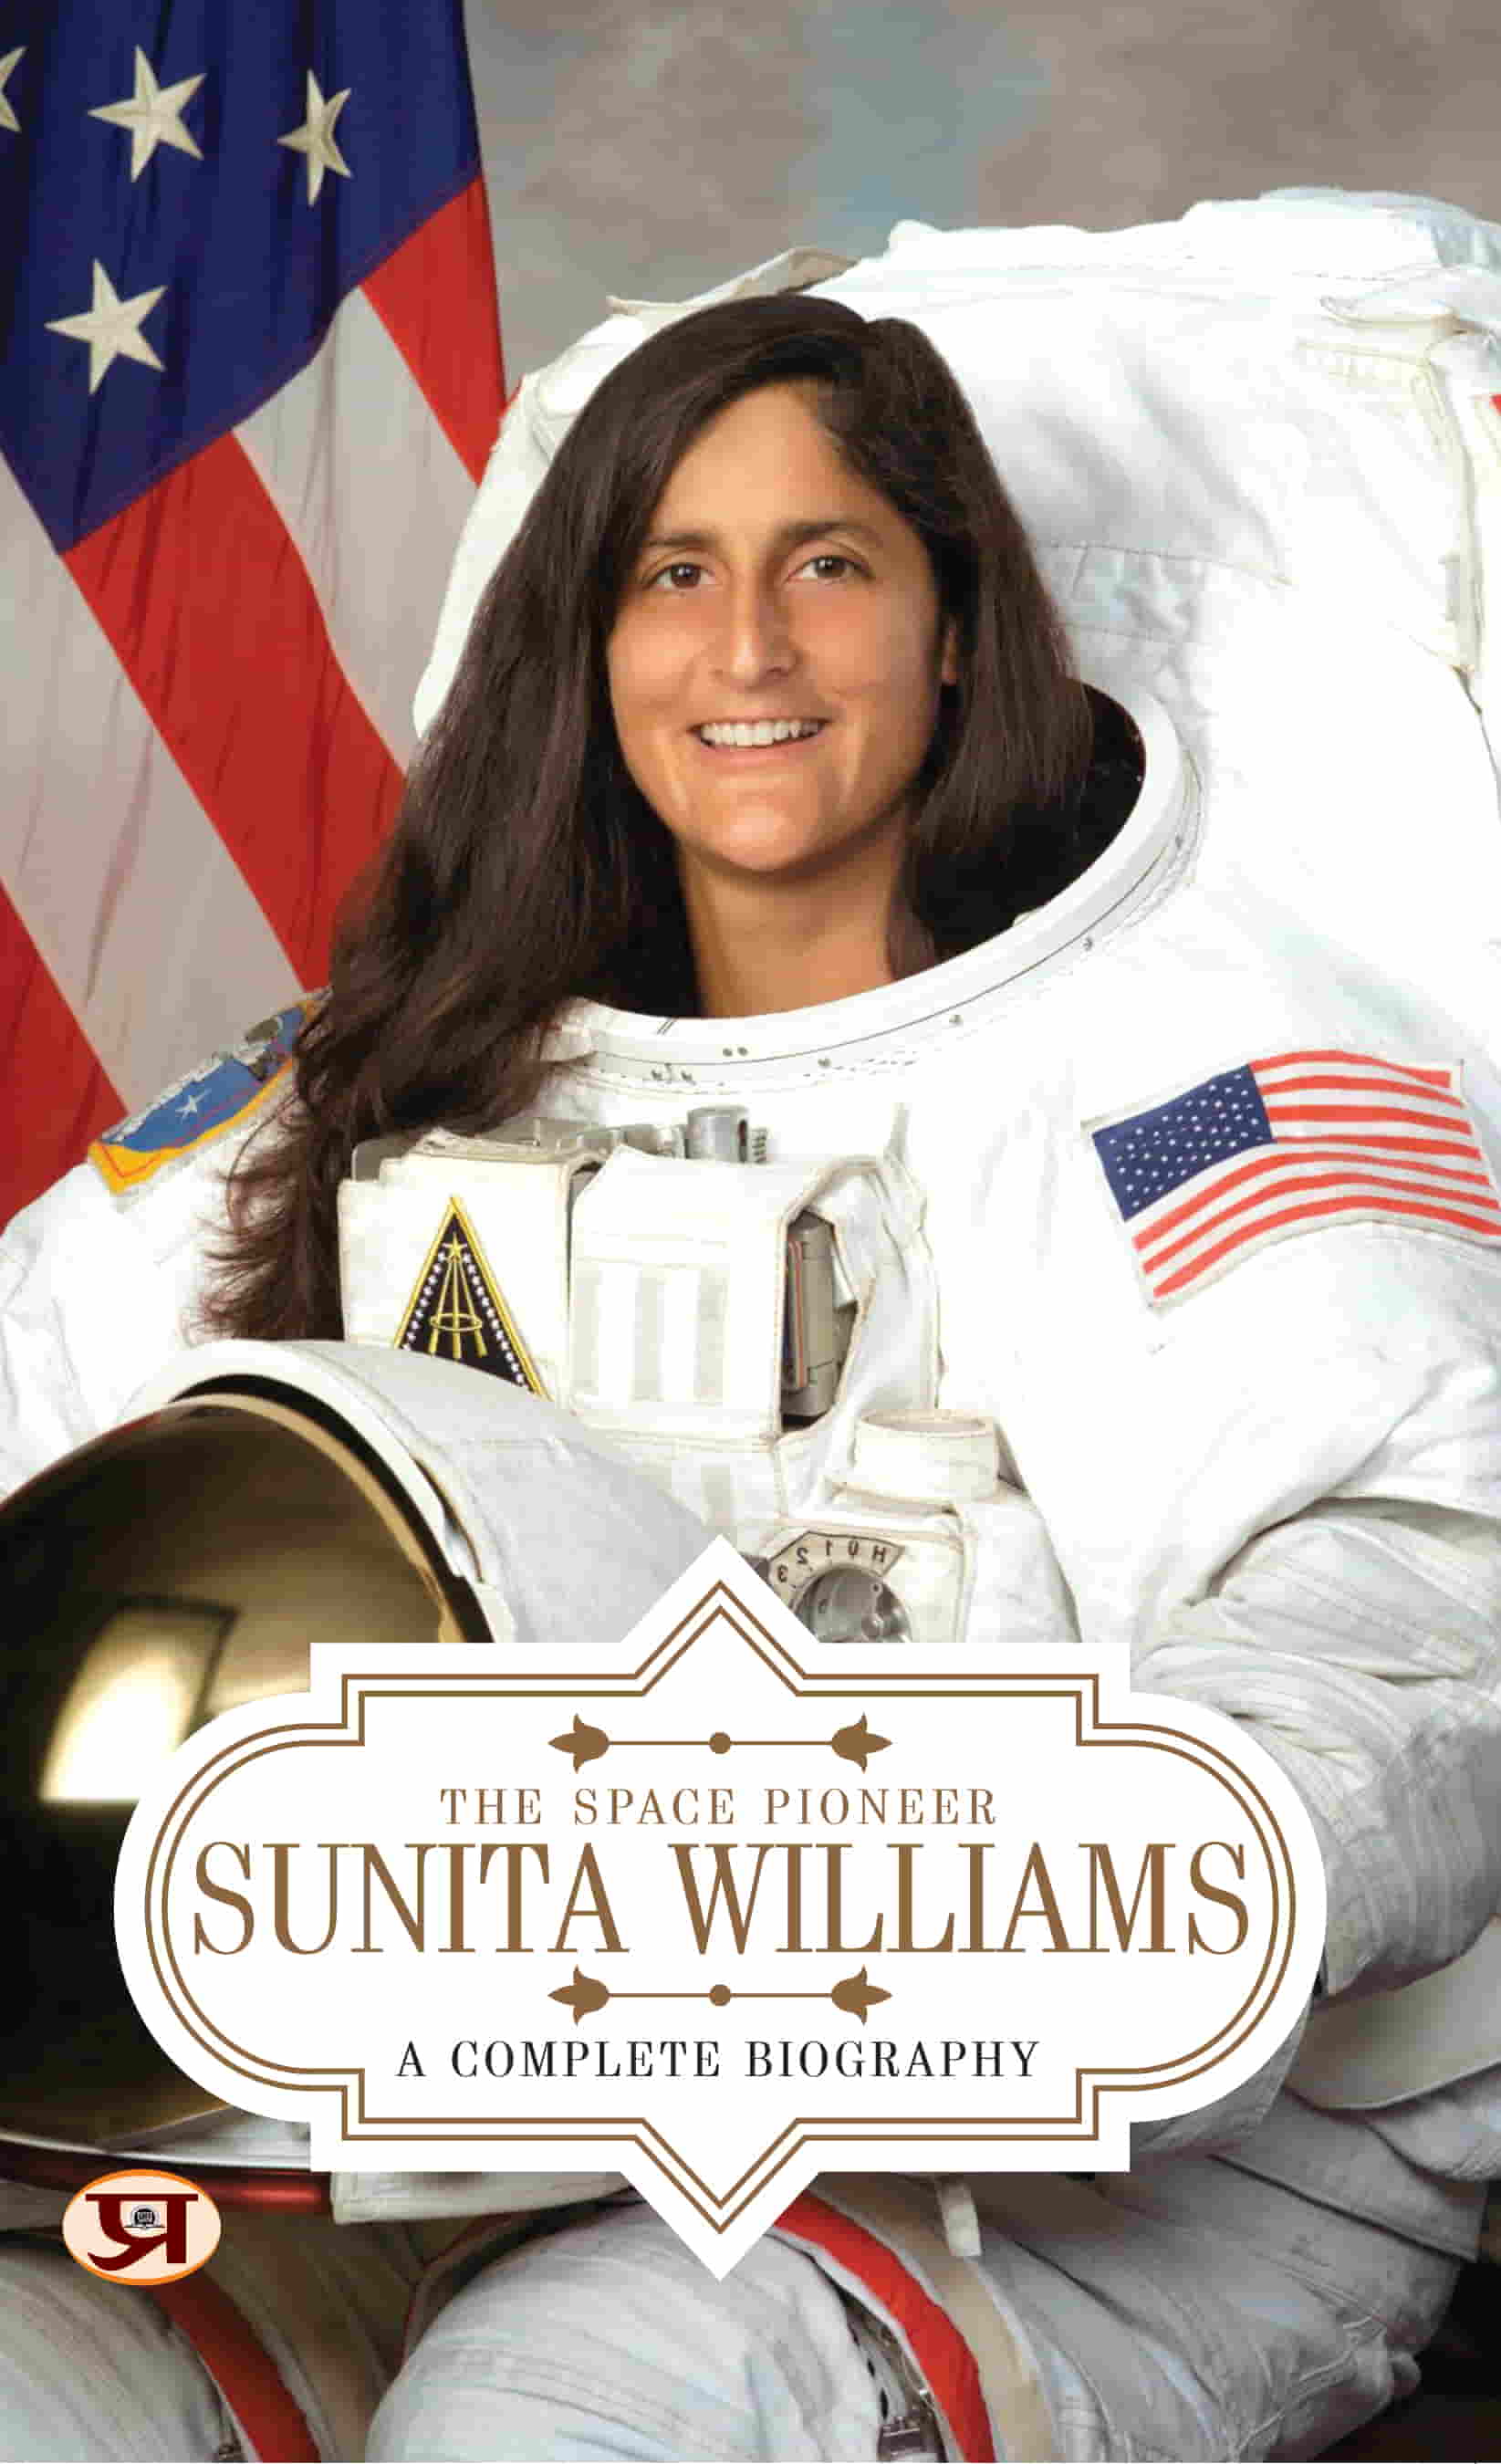 Sunita Williams: A Complete Biography | The Space Pioneer & astronaut